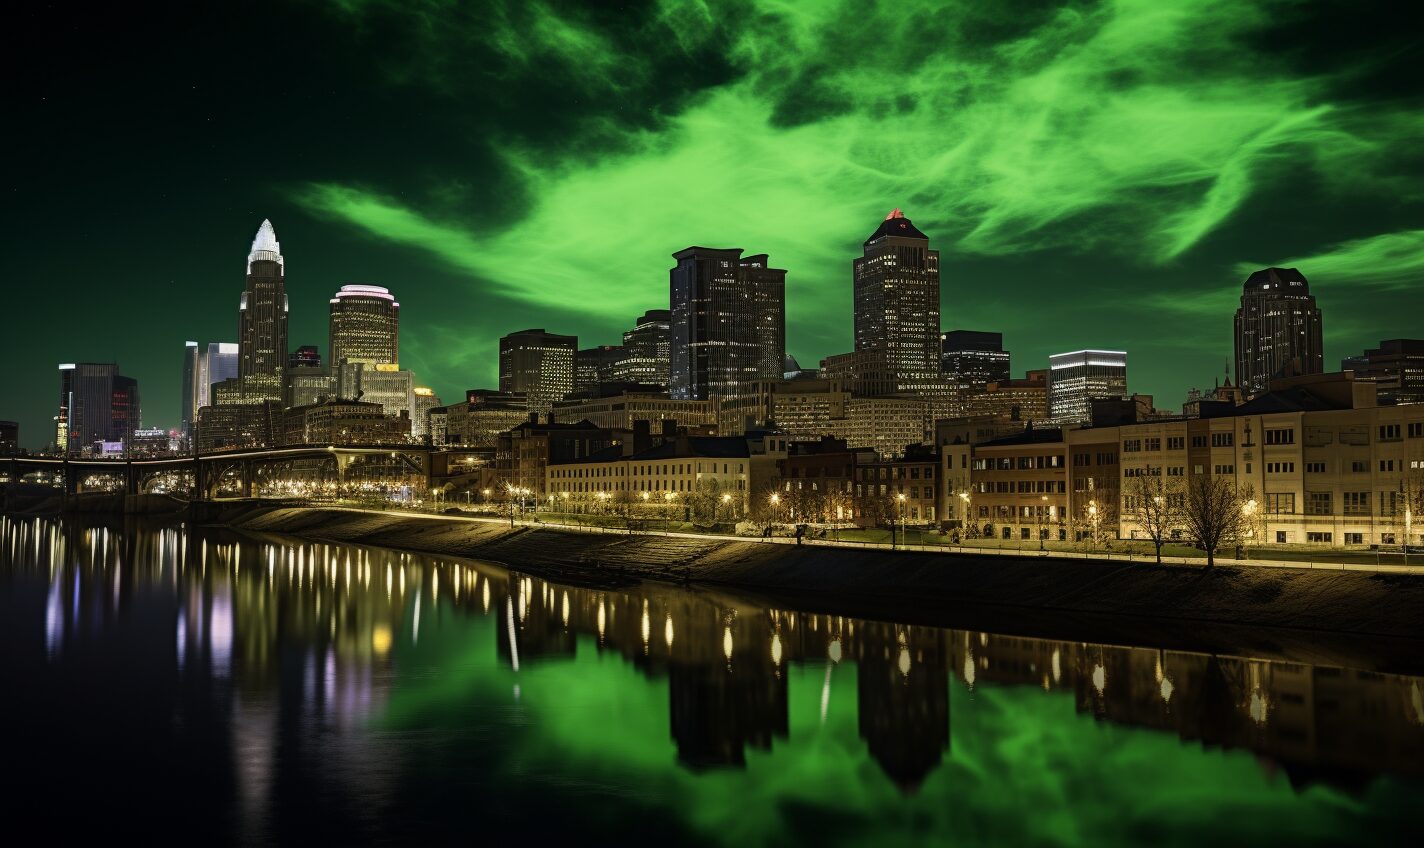 columbus, ohio in a black and neon green glow